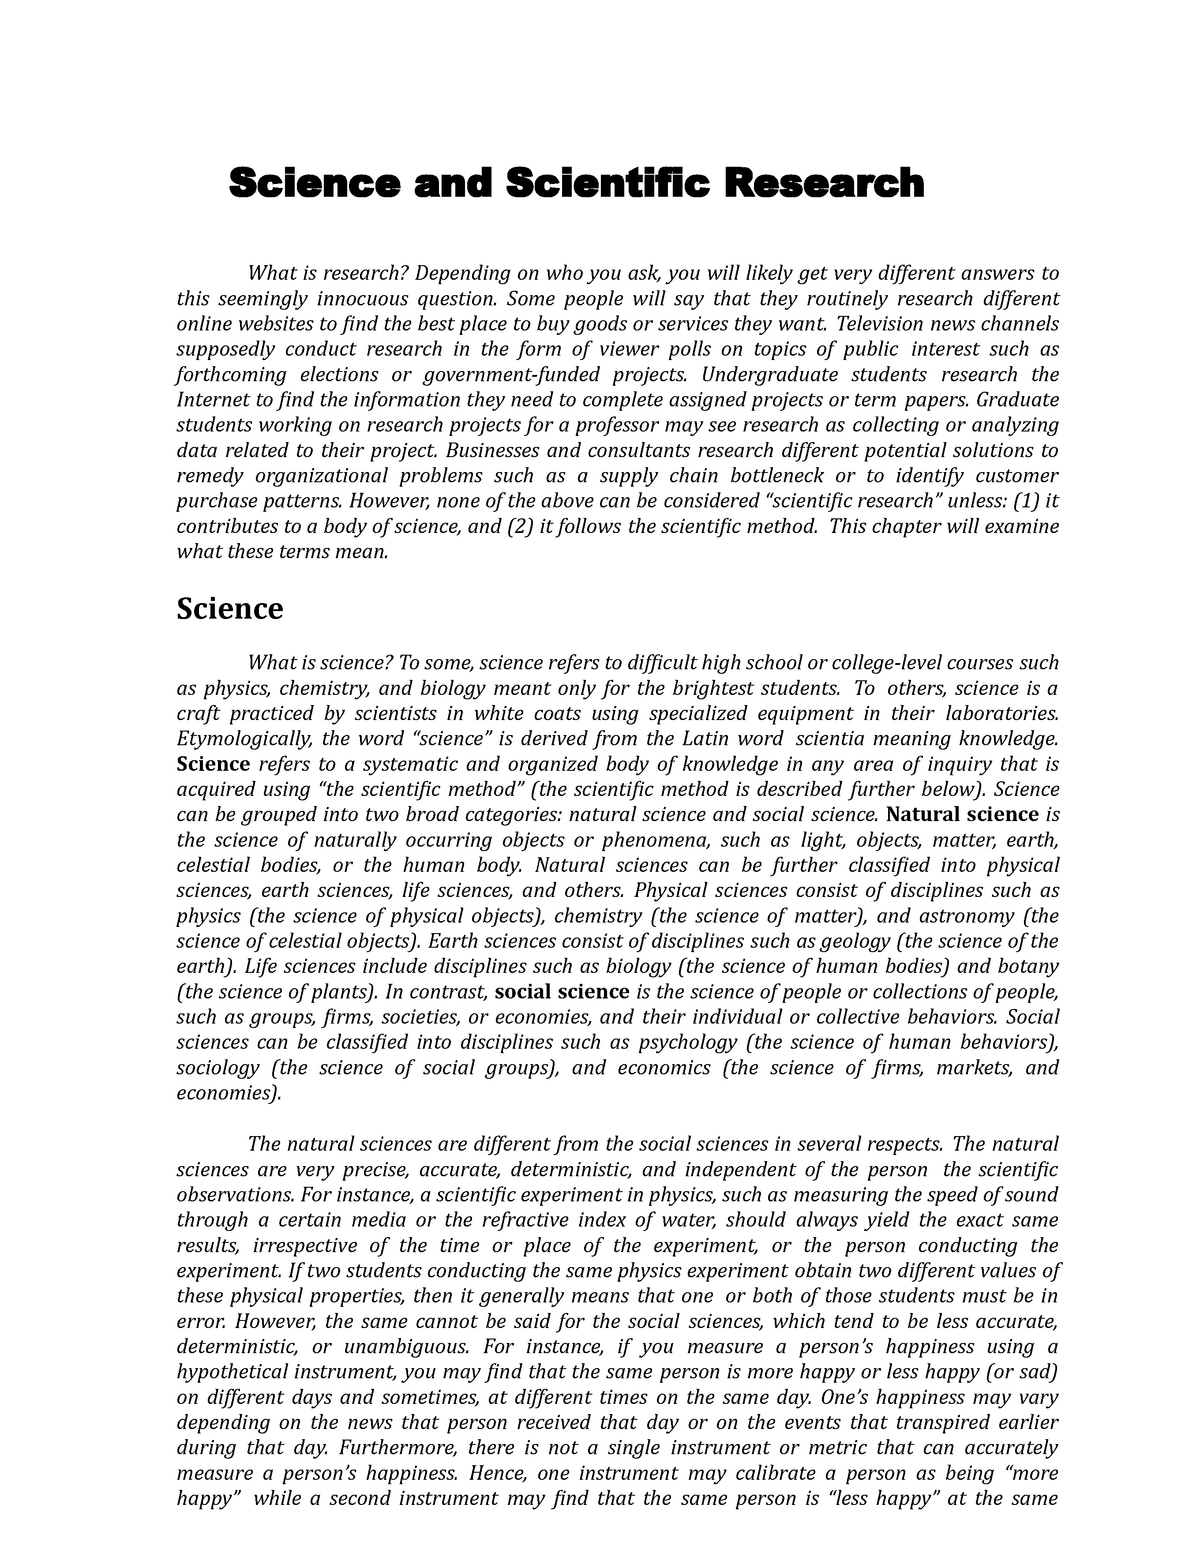 write a research question based on a social science perspective